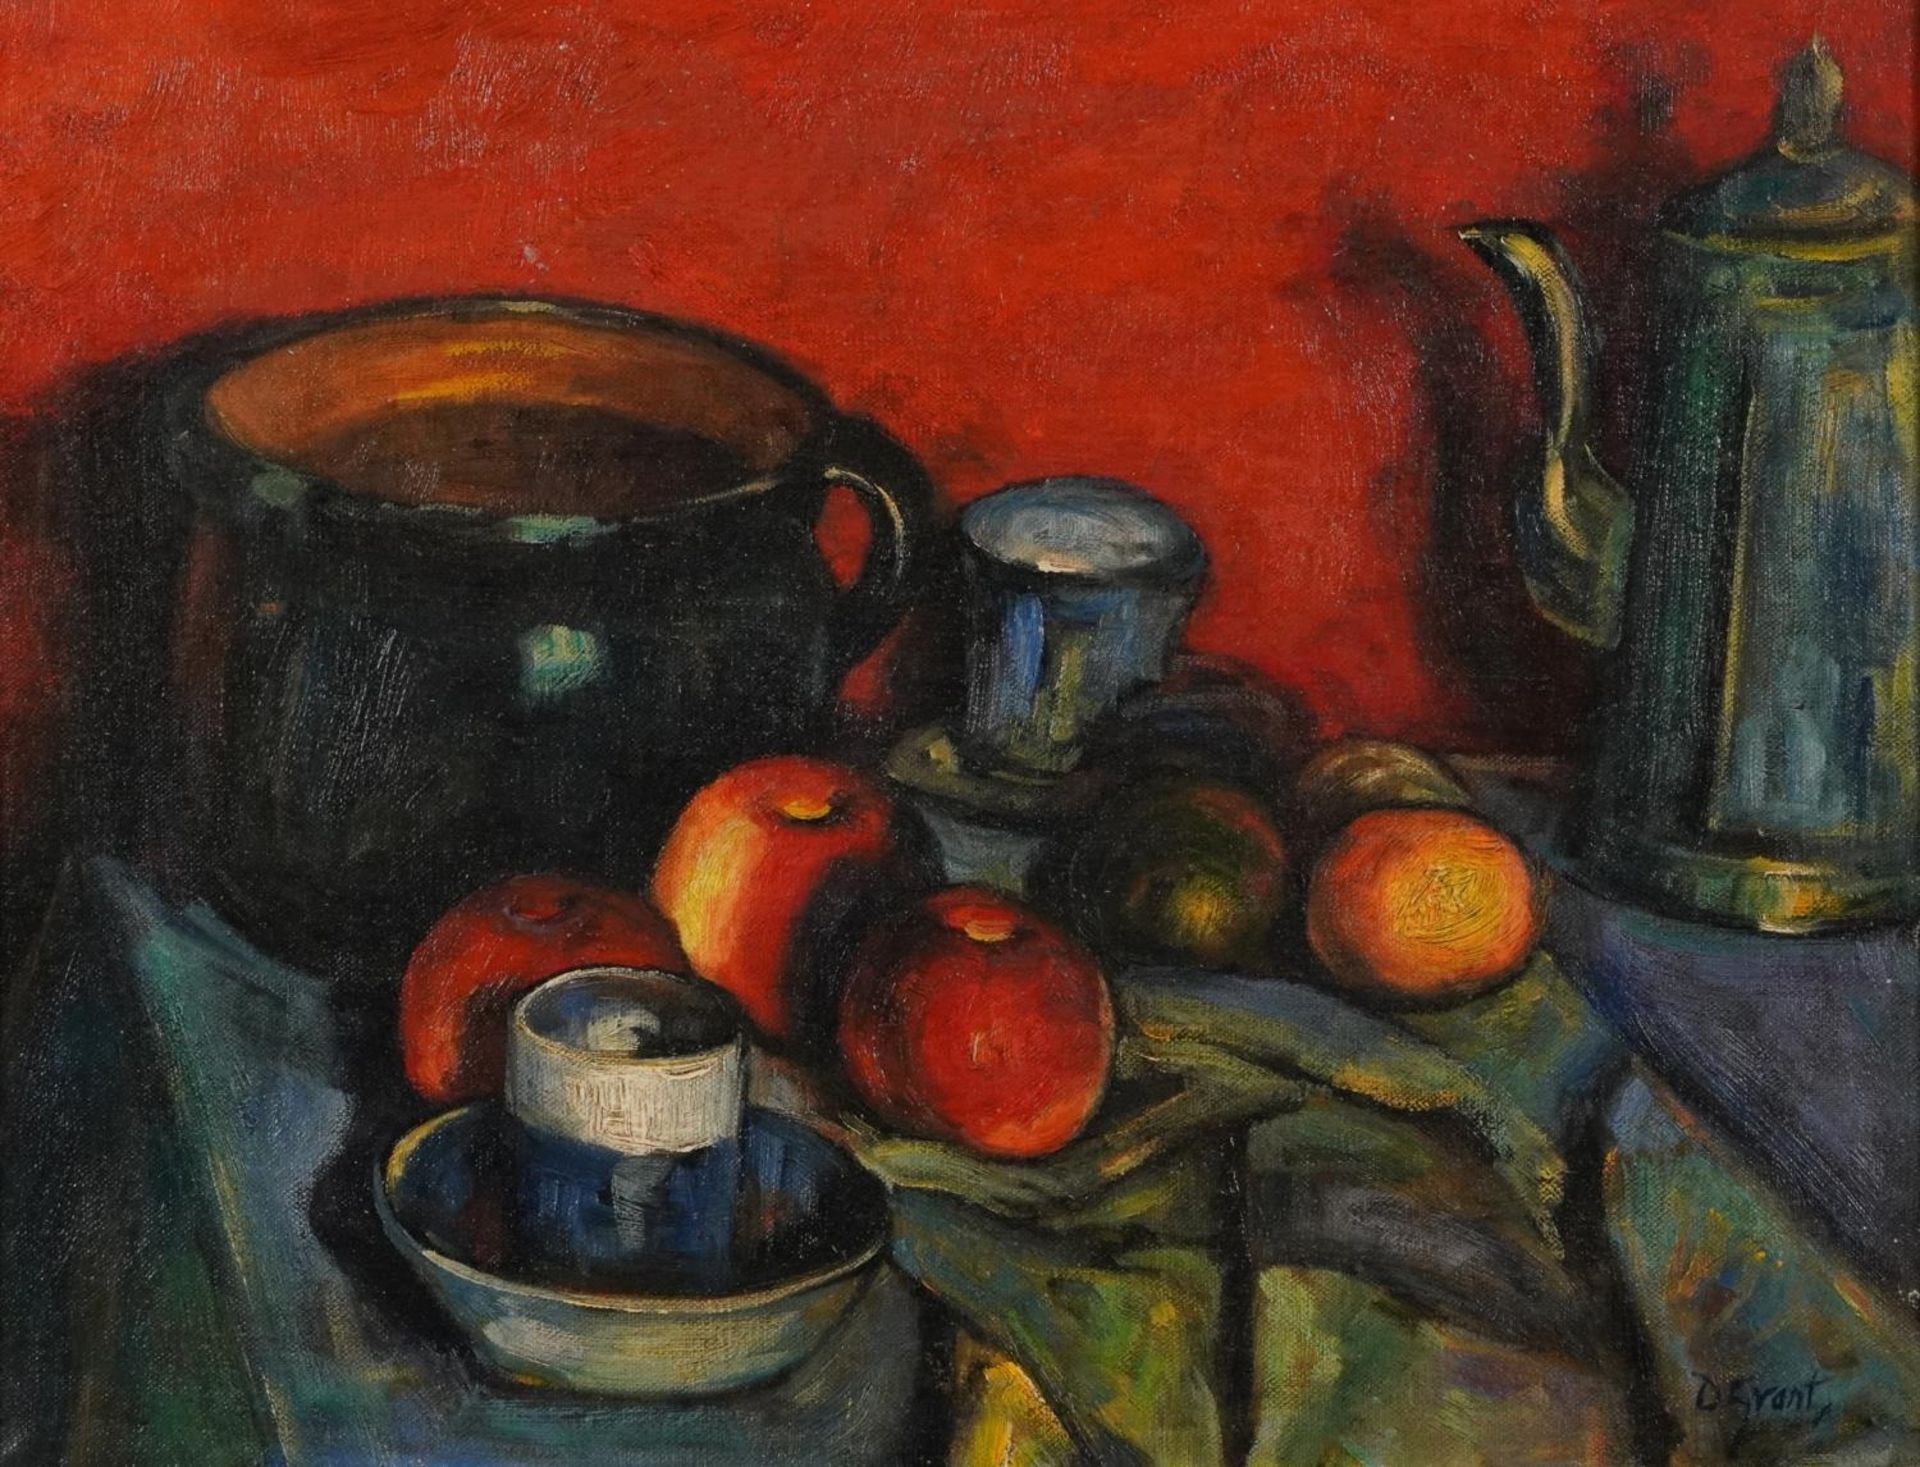 Still life, vessels and fruit, Camden Town school oil on board, mounted and framed, 45cm x 35cm